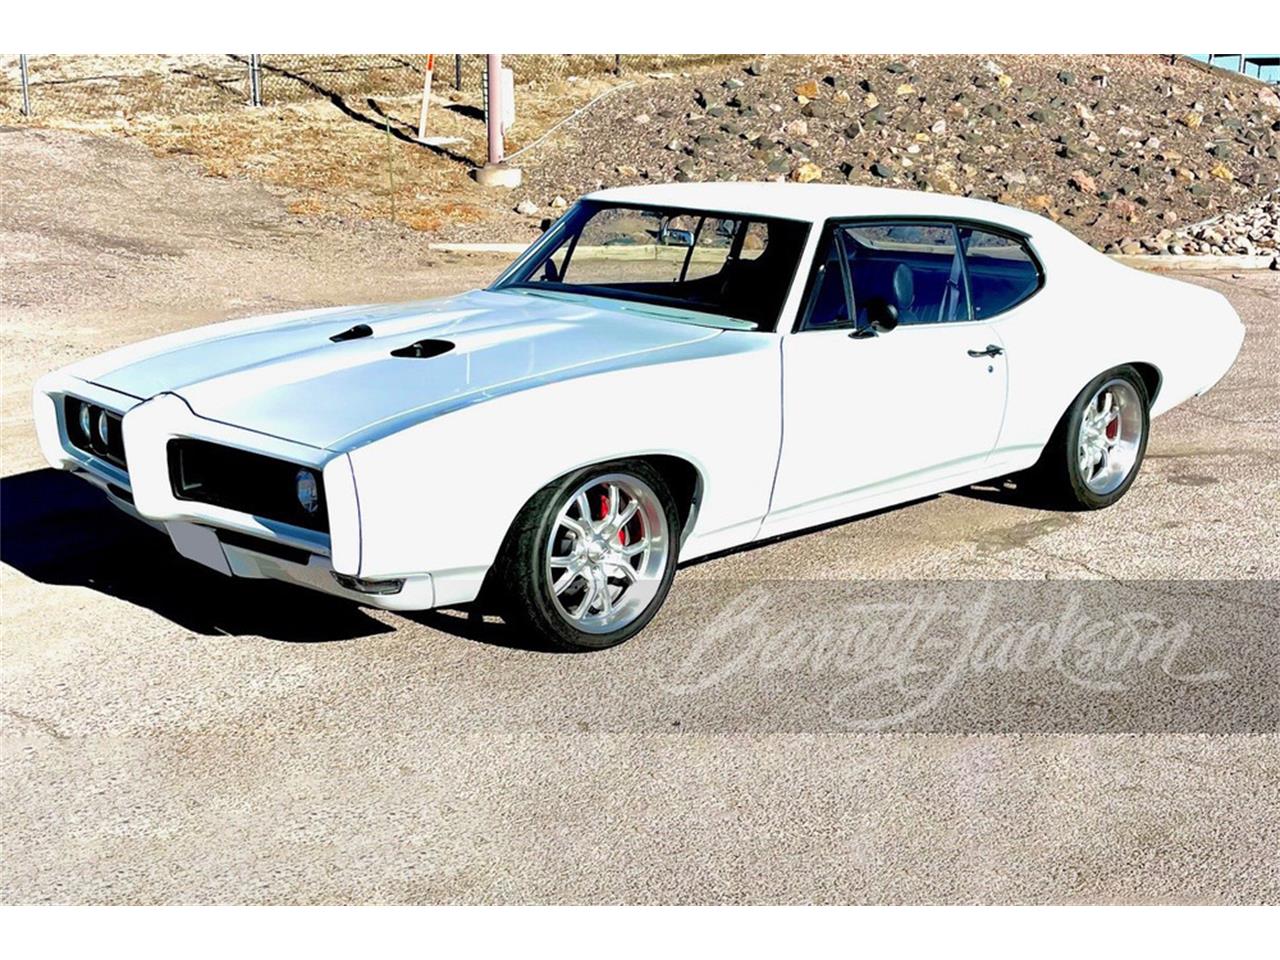 For Sale at Auction: 1968 Pontiac GTO in Scottsdale, Arizona for sale in Scottsdale, AZ